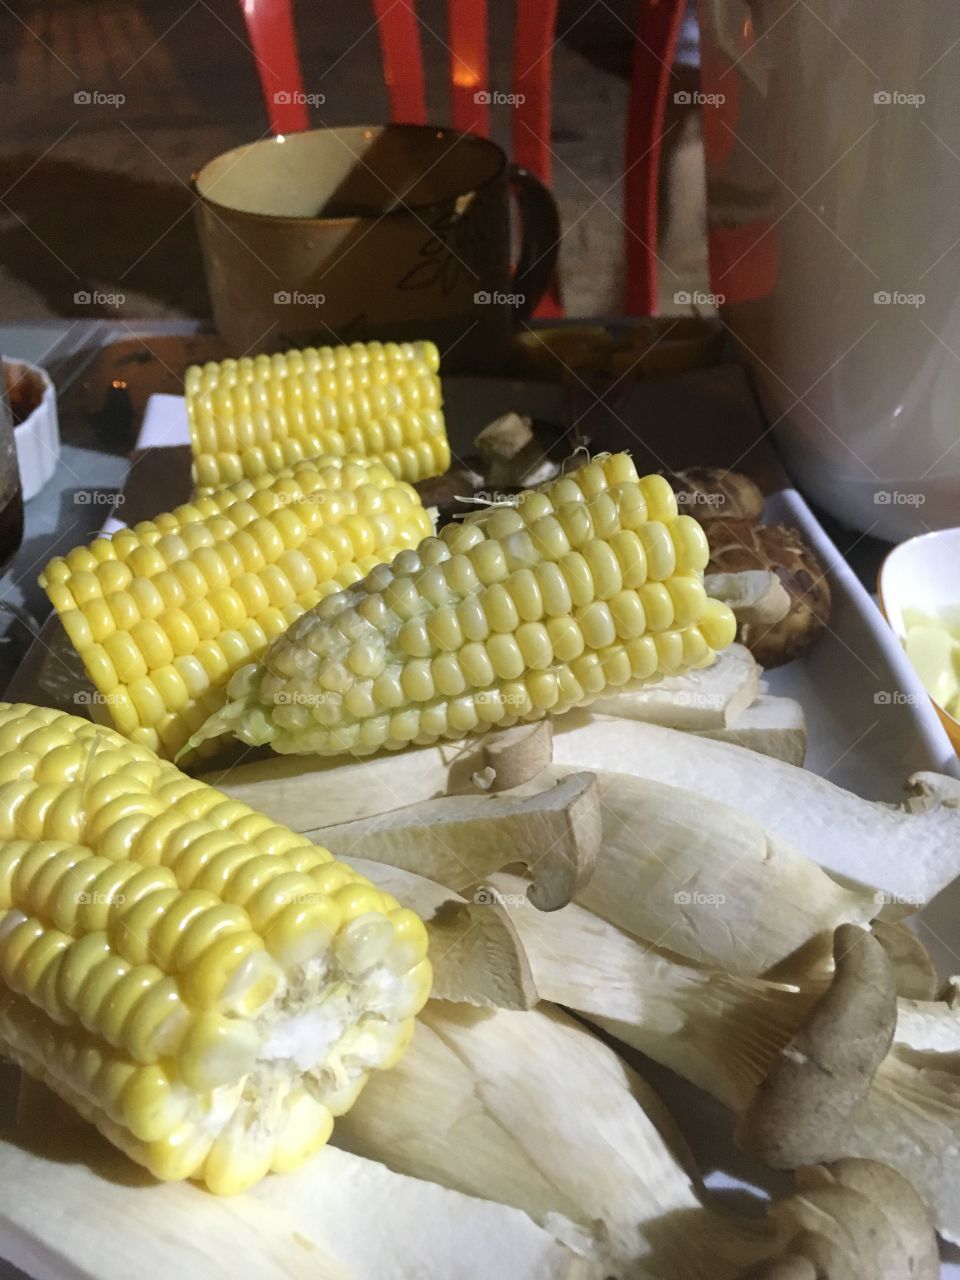 Corns barbeque party